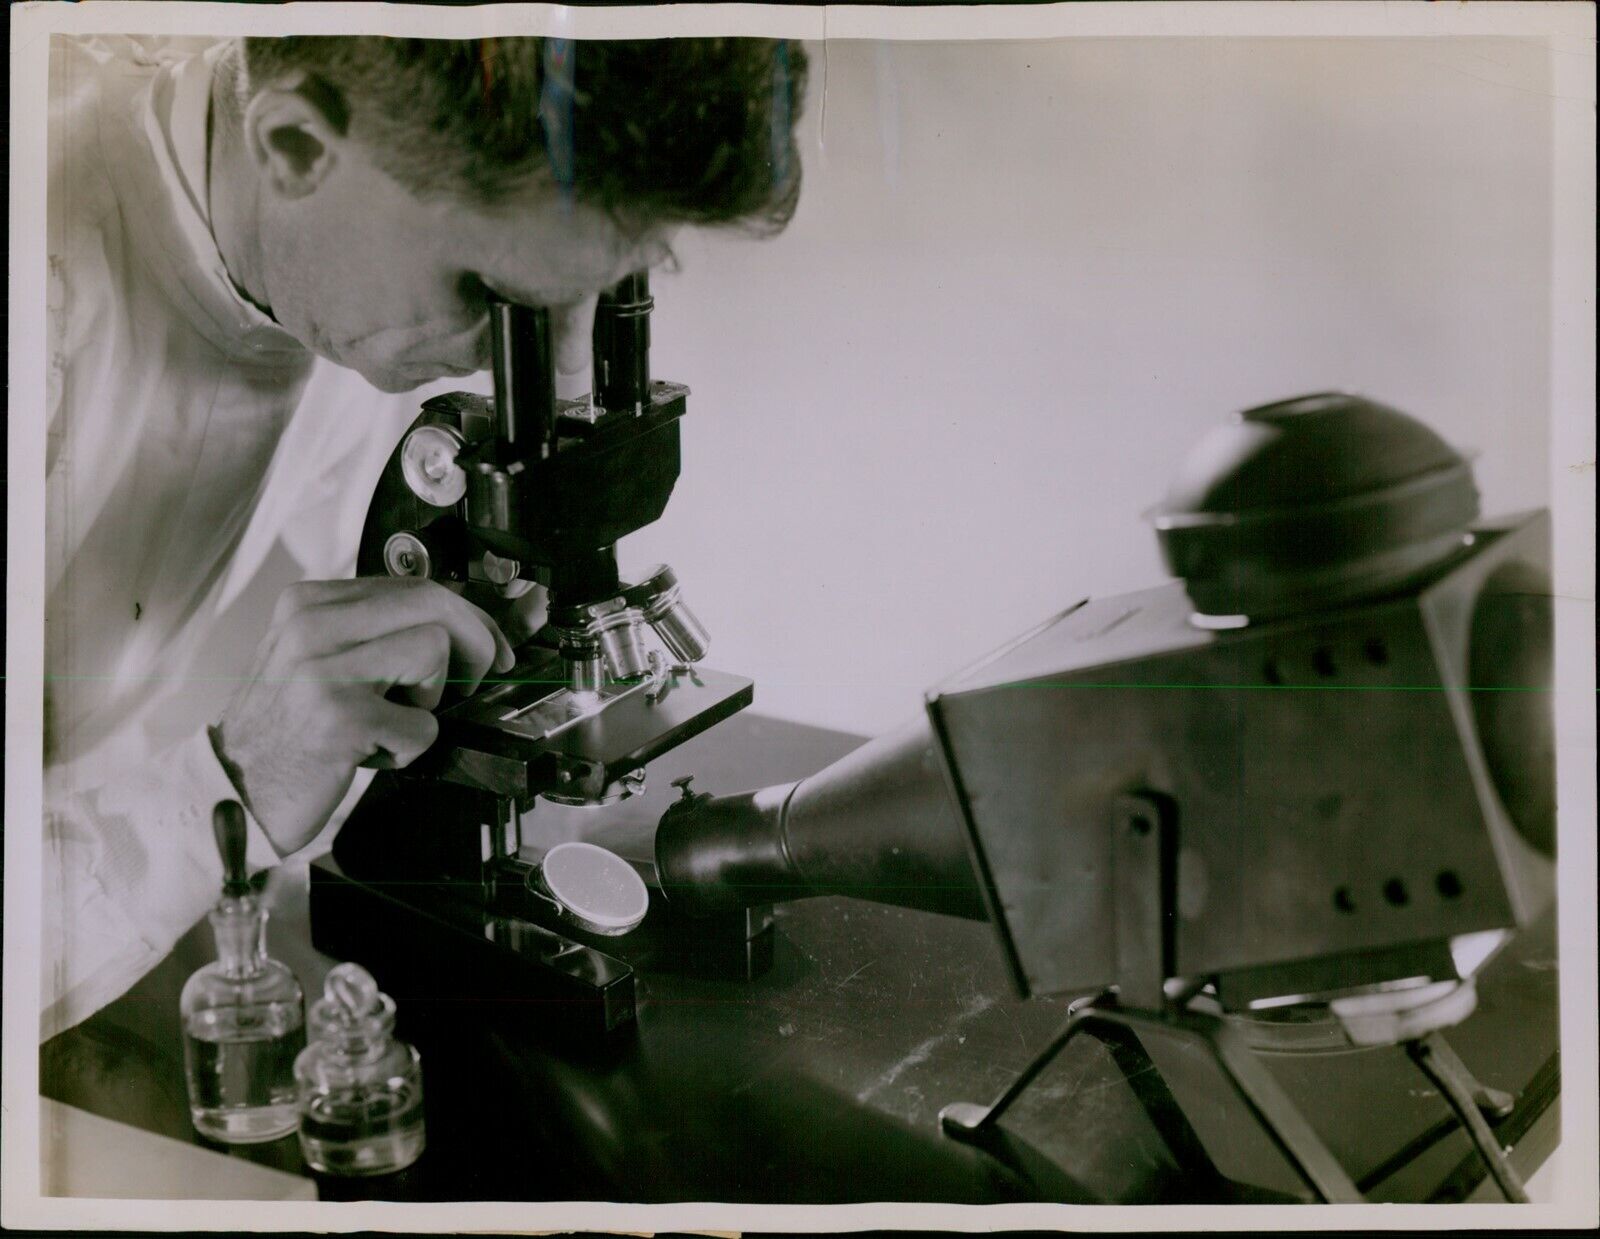 LG882 '37 Original Photo GERM FINDER IN ACTION Doctor Looking Through Microscope